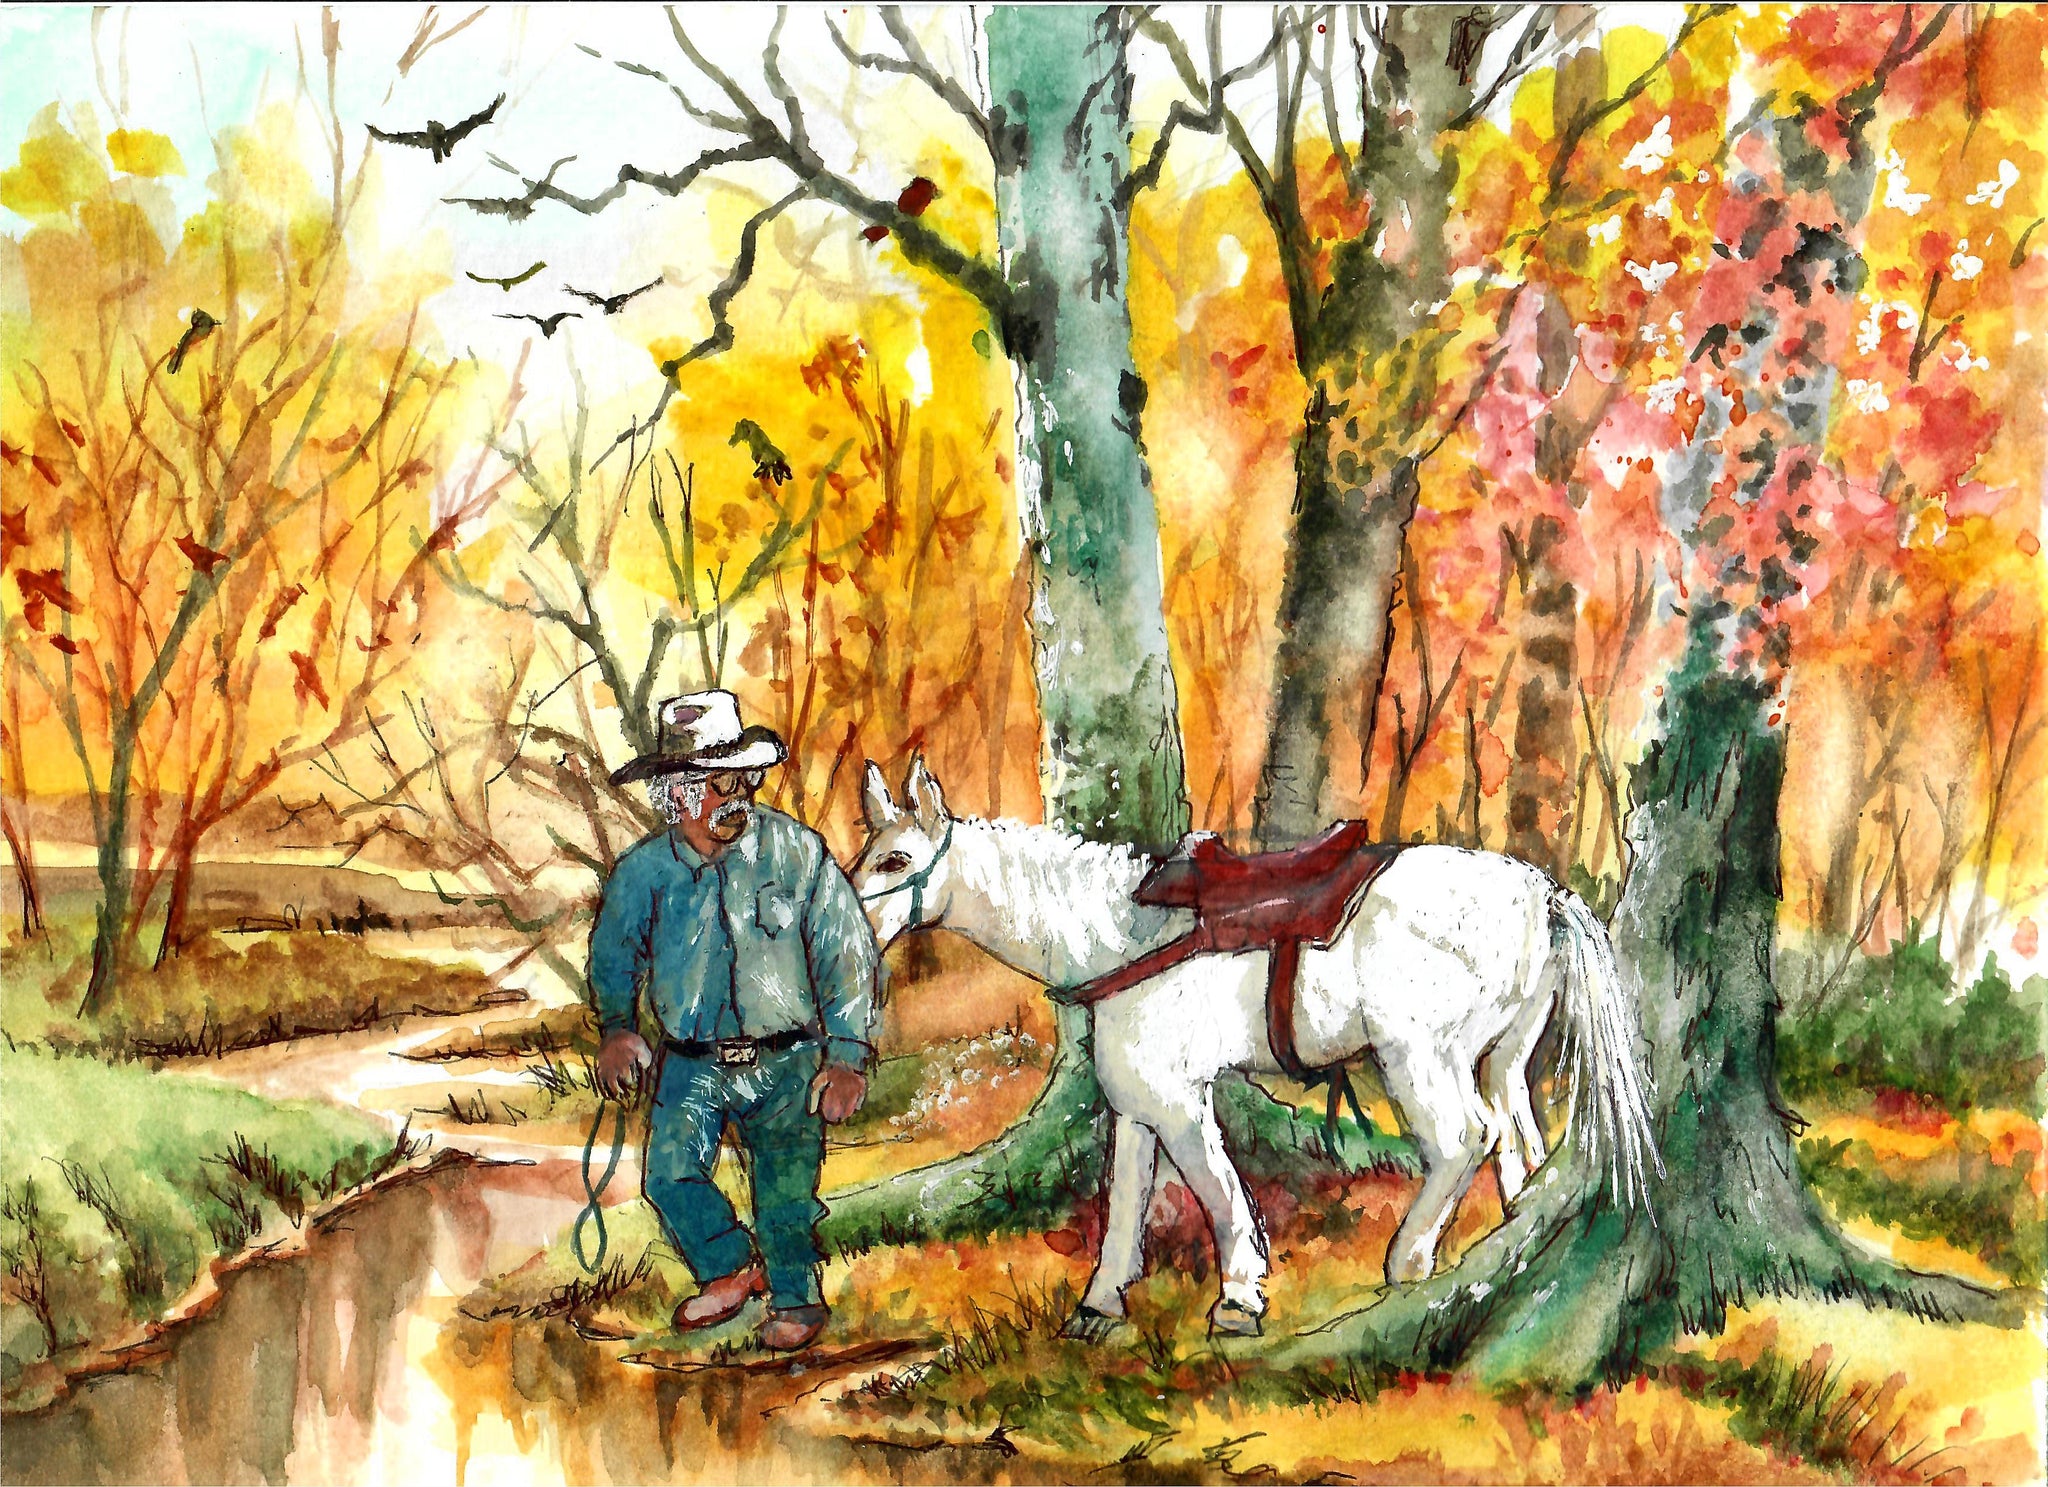 Western - Cowboy Walking White Horse In Forest, Western Art, Cowboy Art, Cowboy And Horse